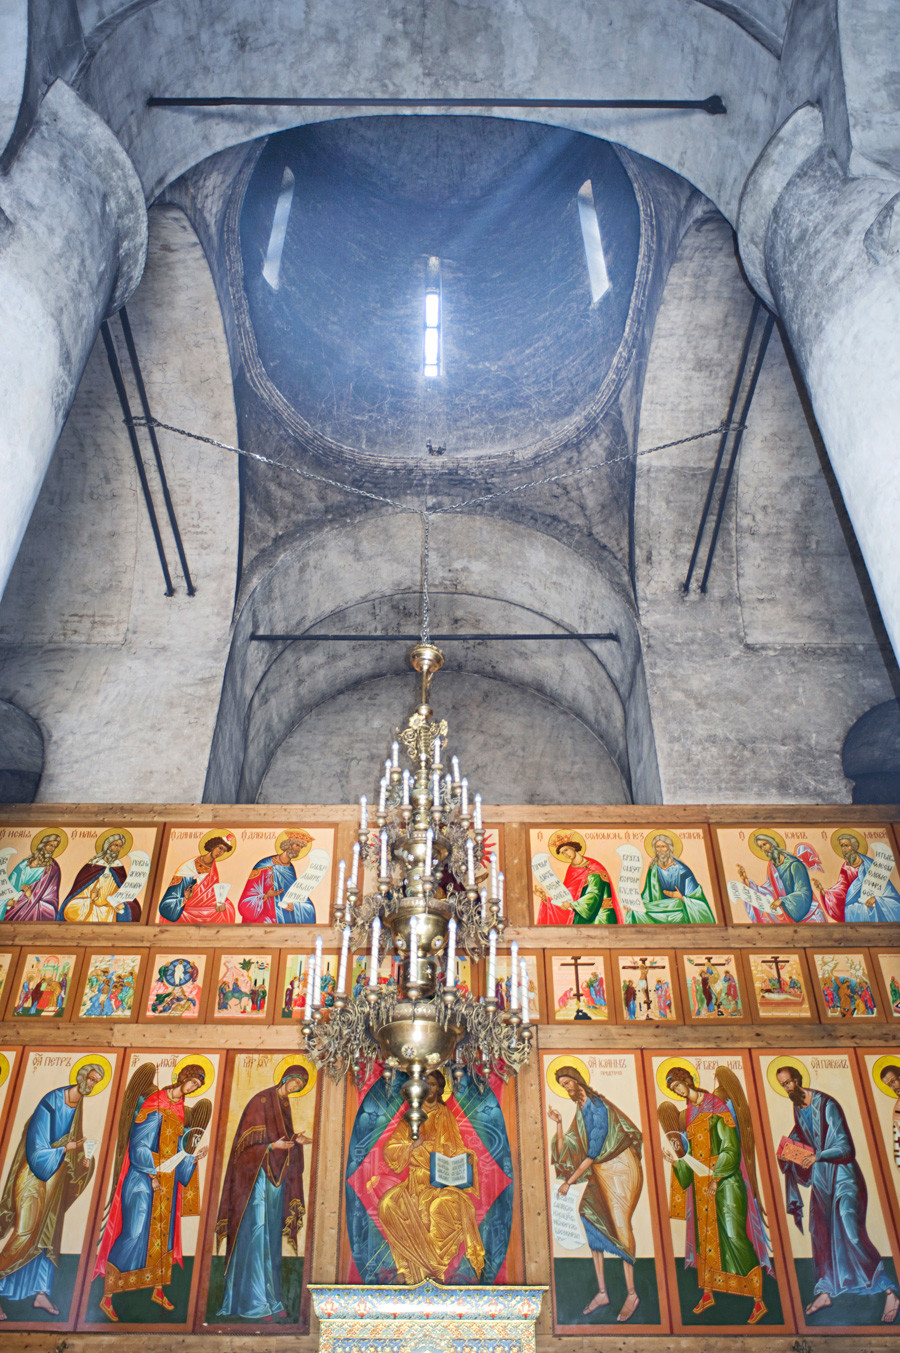 Luzhetsky Monastery. Cathedral of Nativity of the Virgin. Interior, view east toward icon screen & main dome. July 5, 2015.